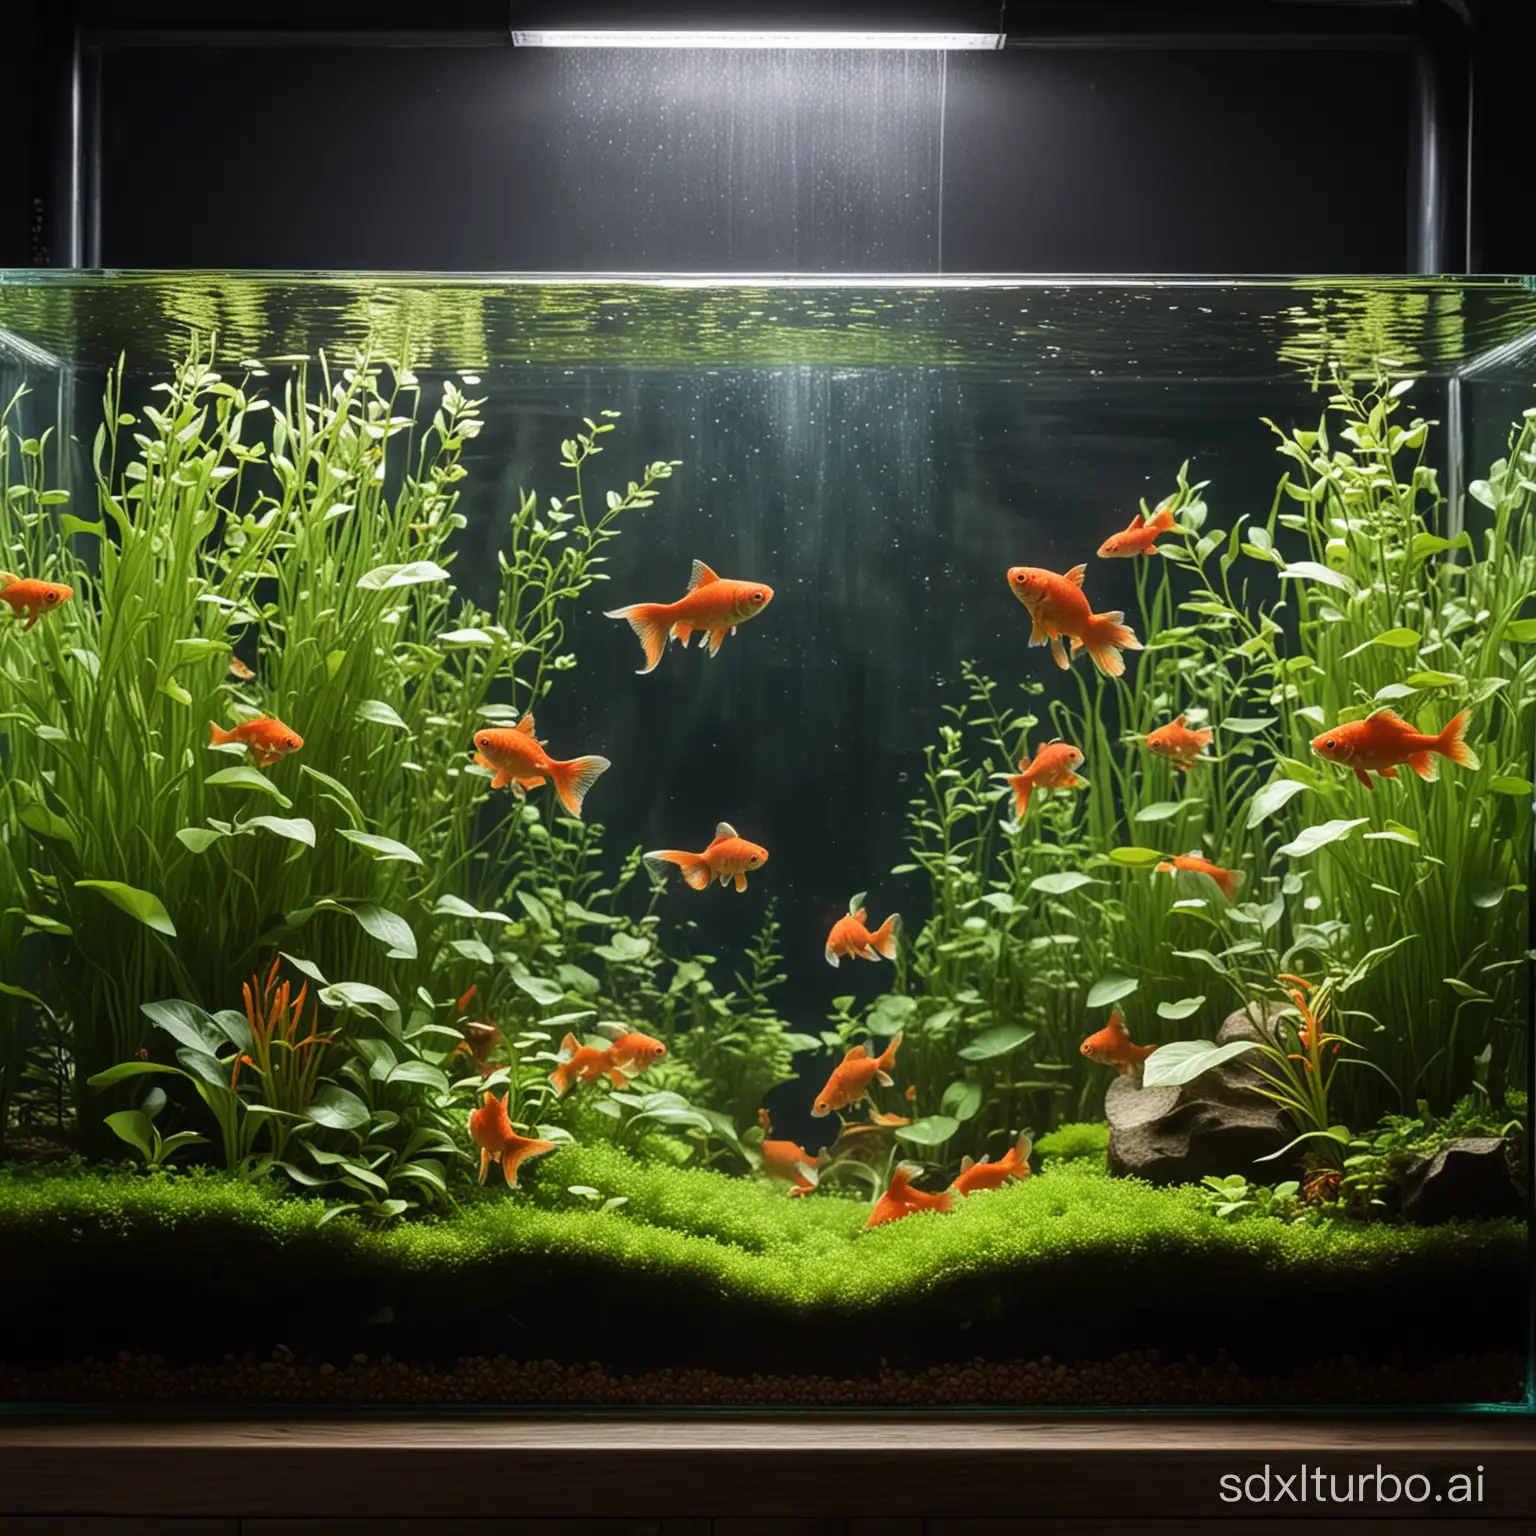 Draw an overhead fish tank, with many small water plants resembling mossy three-lobed leaves at the bottom of the tank, with two red goldfish swimming inside.